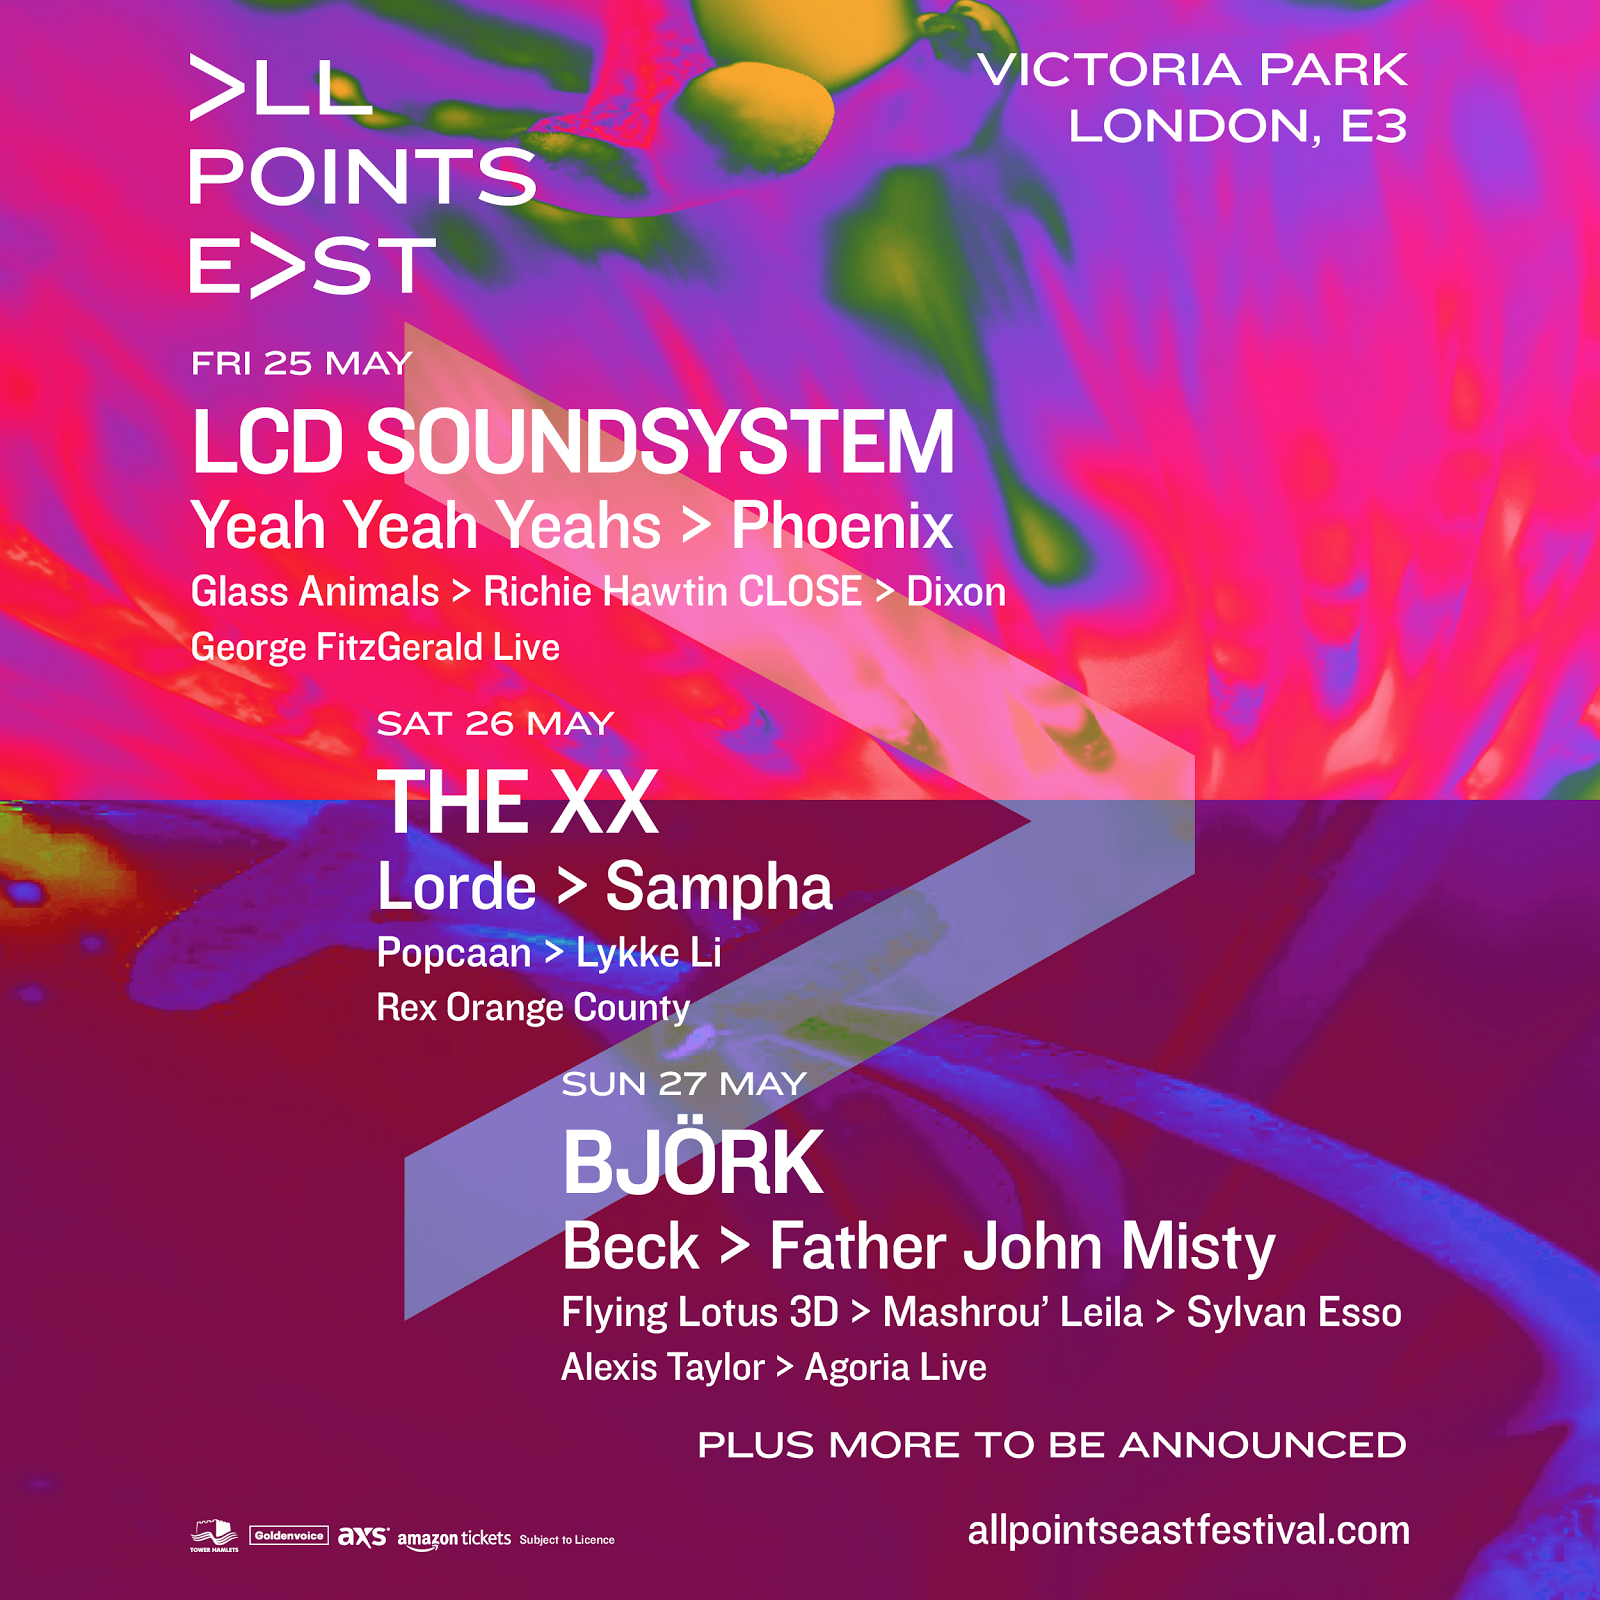 All Points East announces Björk, LCD Soundsystem, Lorde, Beck and more